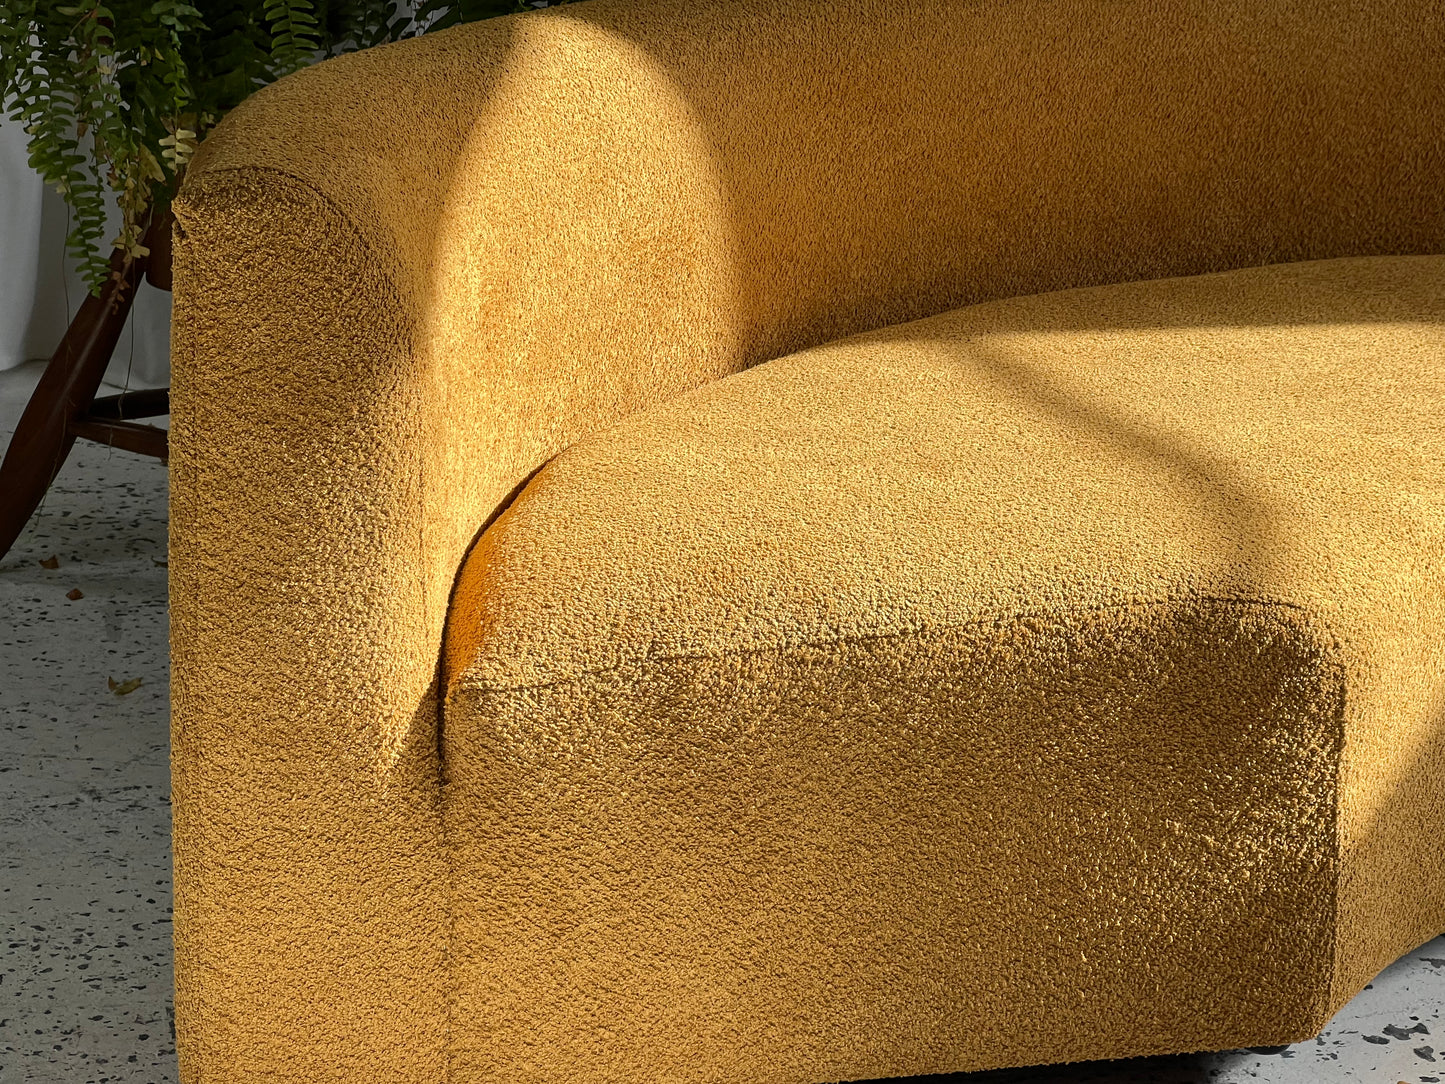 Two Piece Curved Mustard Sofa